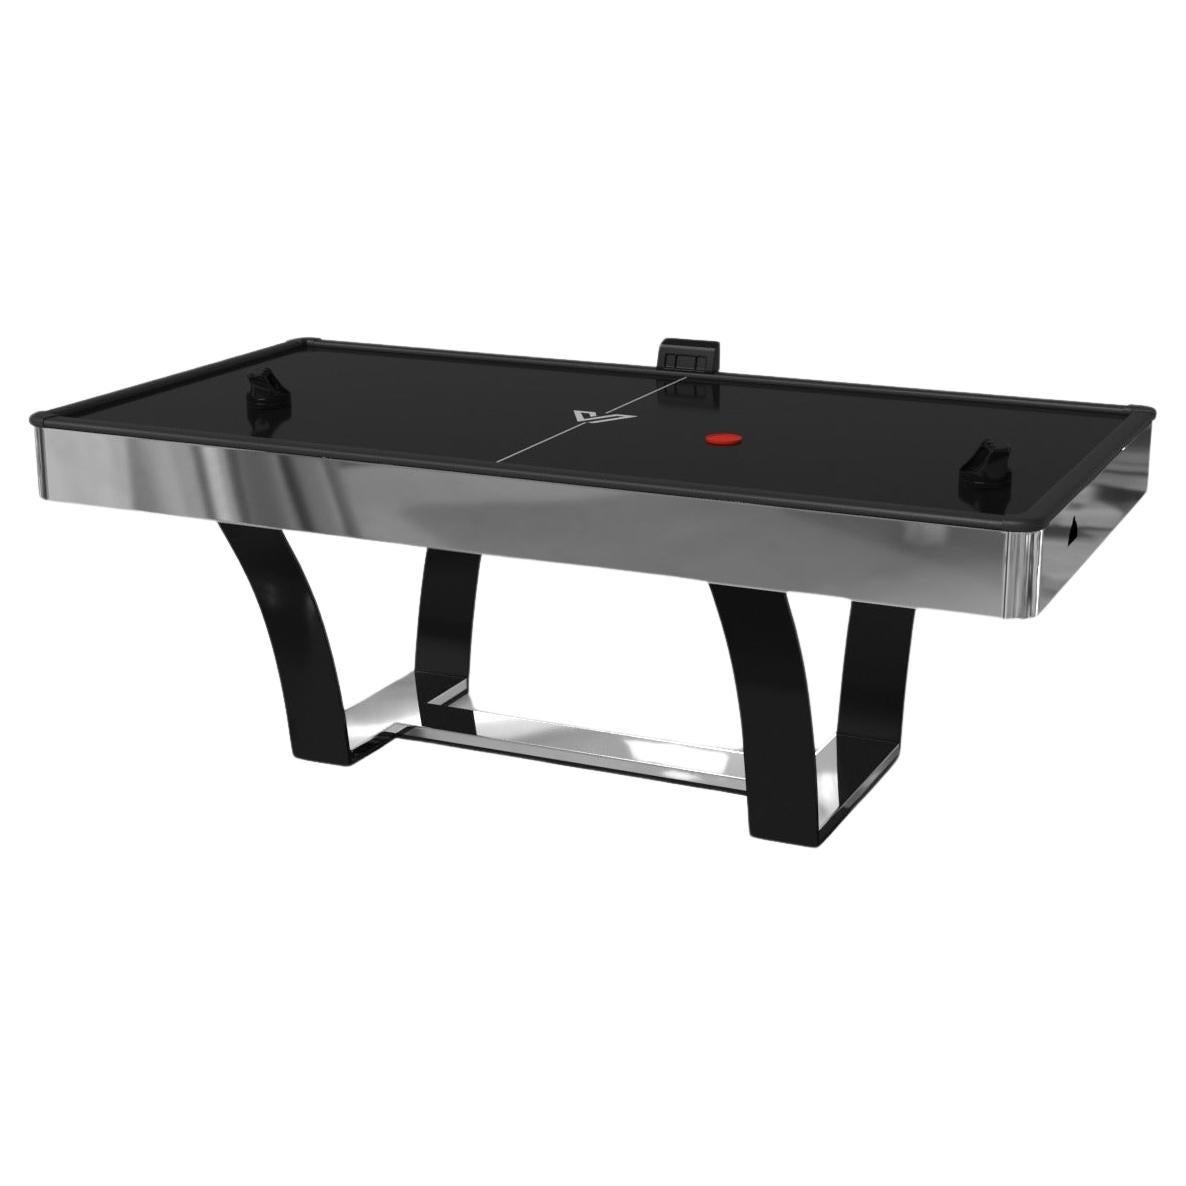 Elevate Customs Elite Air Hockey Tables/Stainless Steel Metal in 7' -Made in USA For Sale